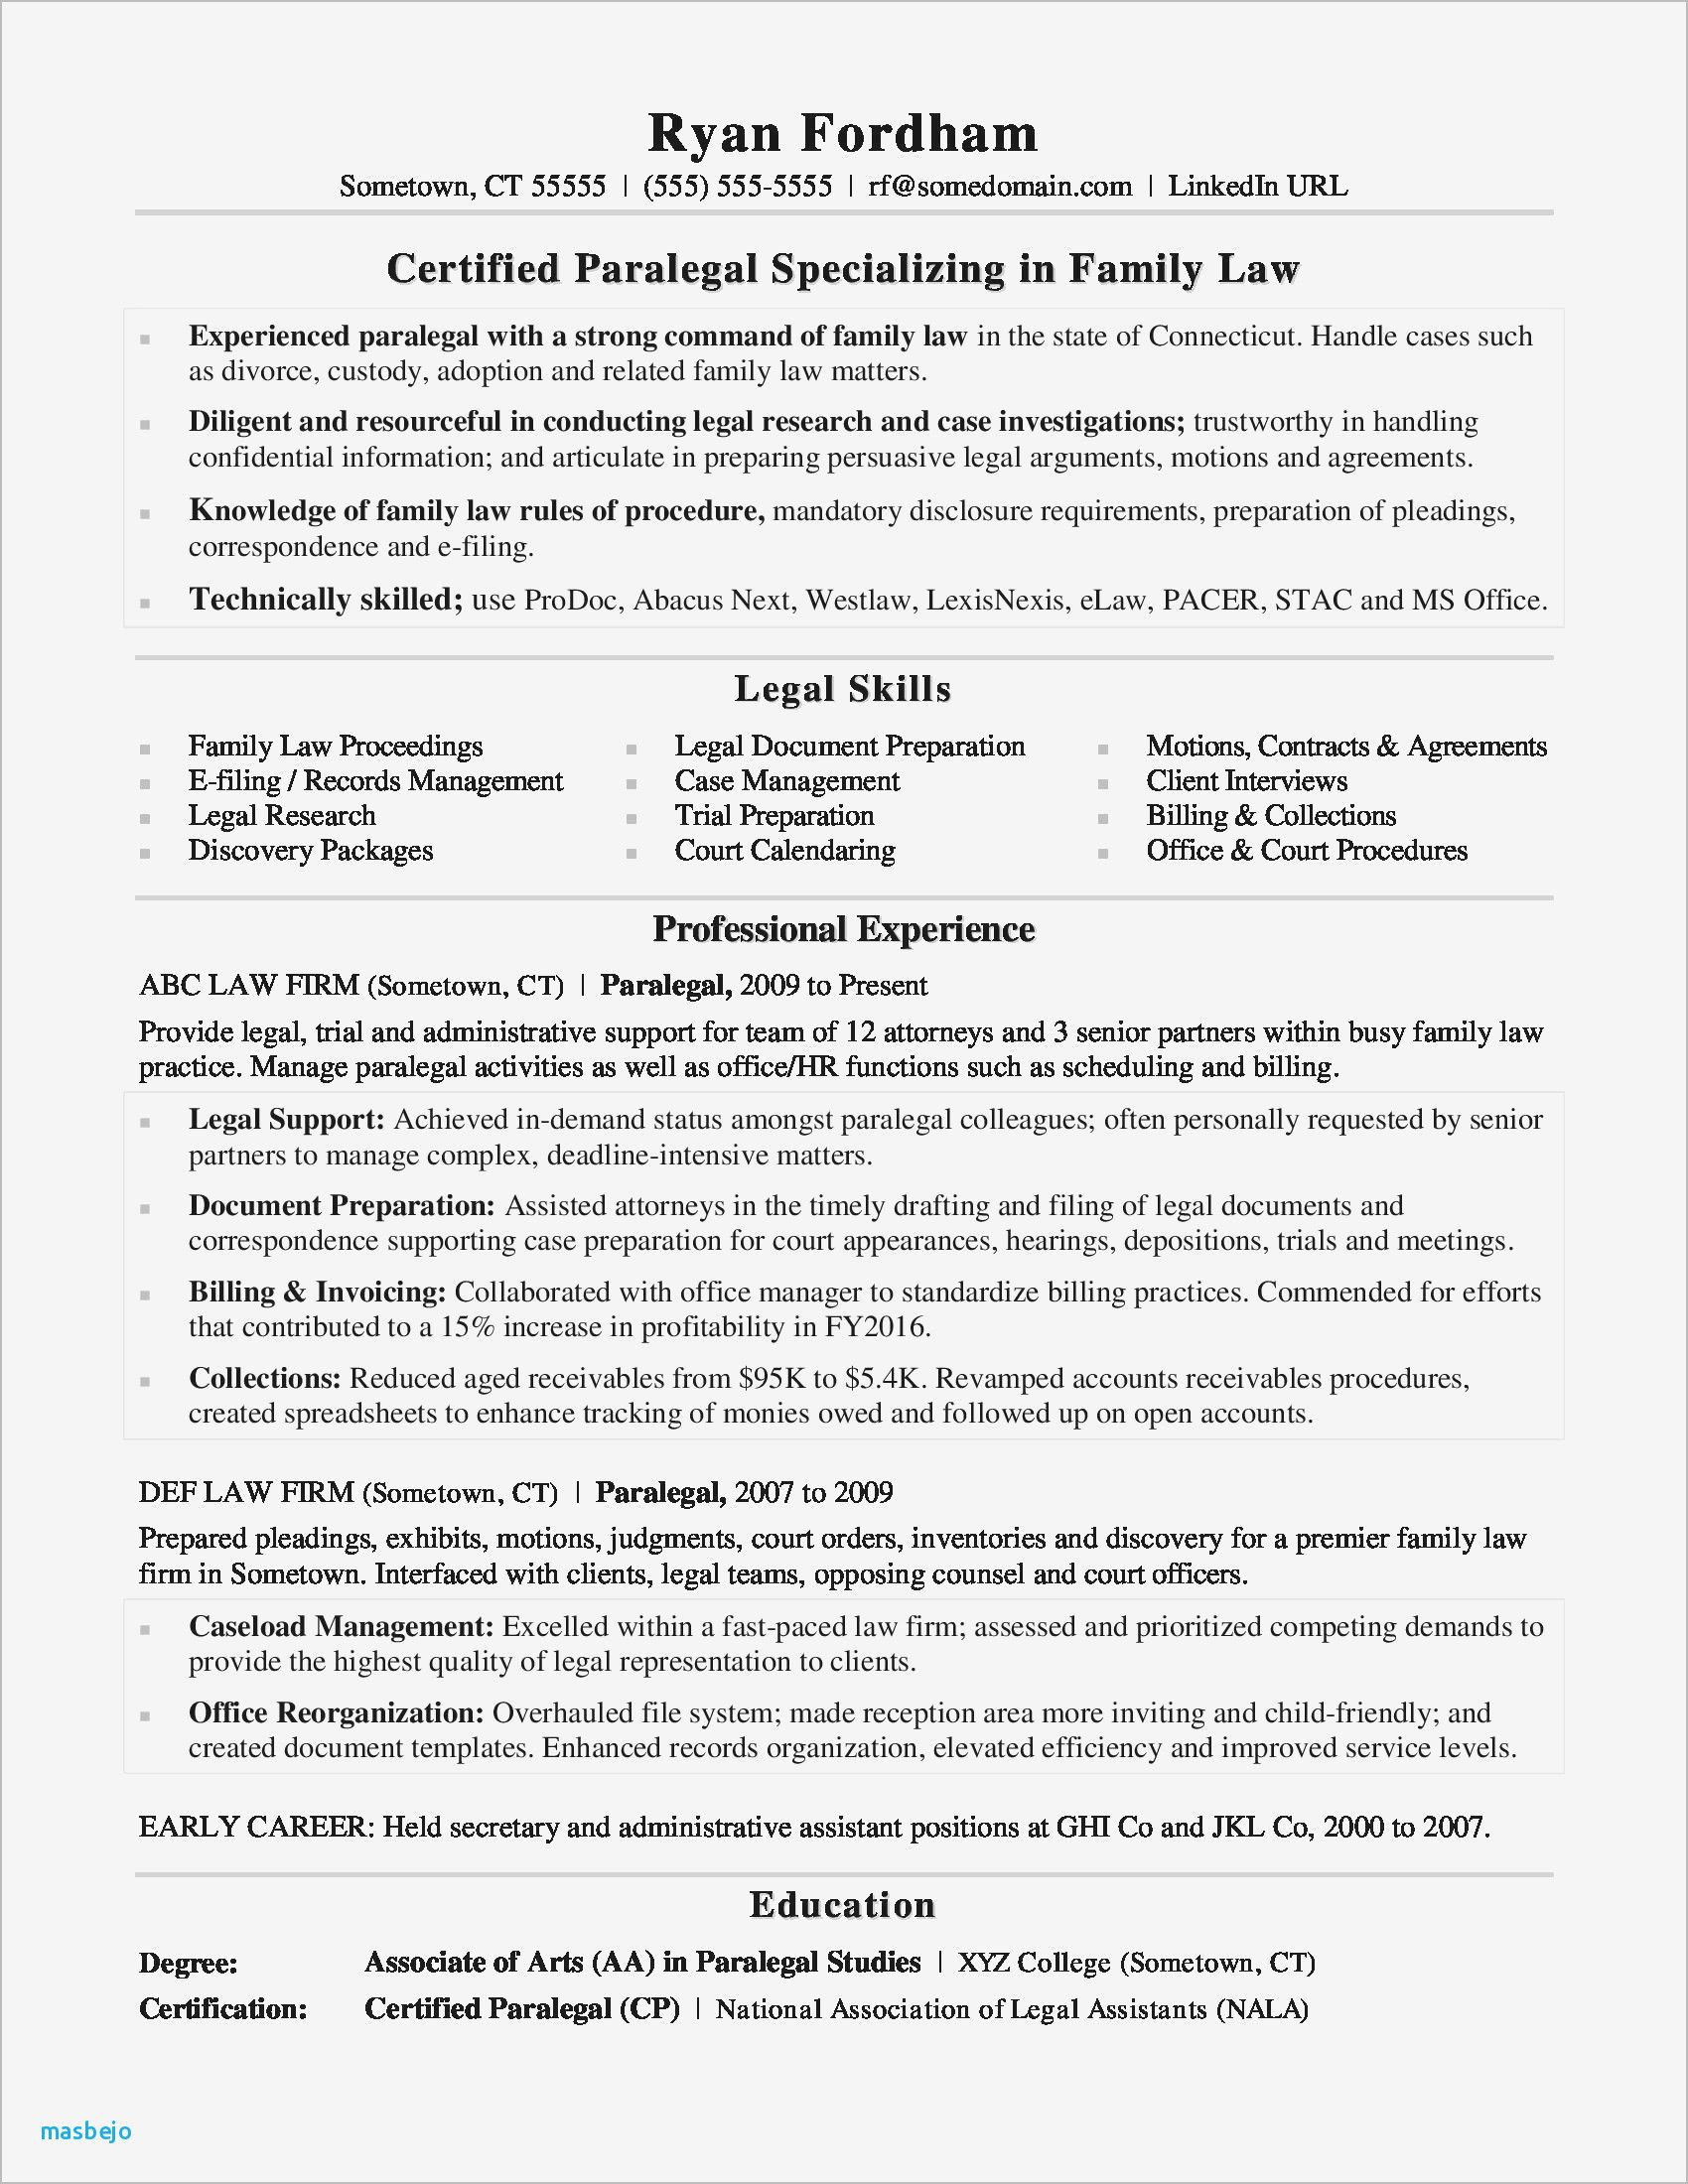 Free Resume Templates for Government Jobs 75 New Gallery Of Resume Examples for Federal Government Jobs …